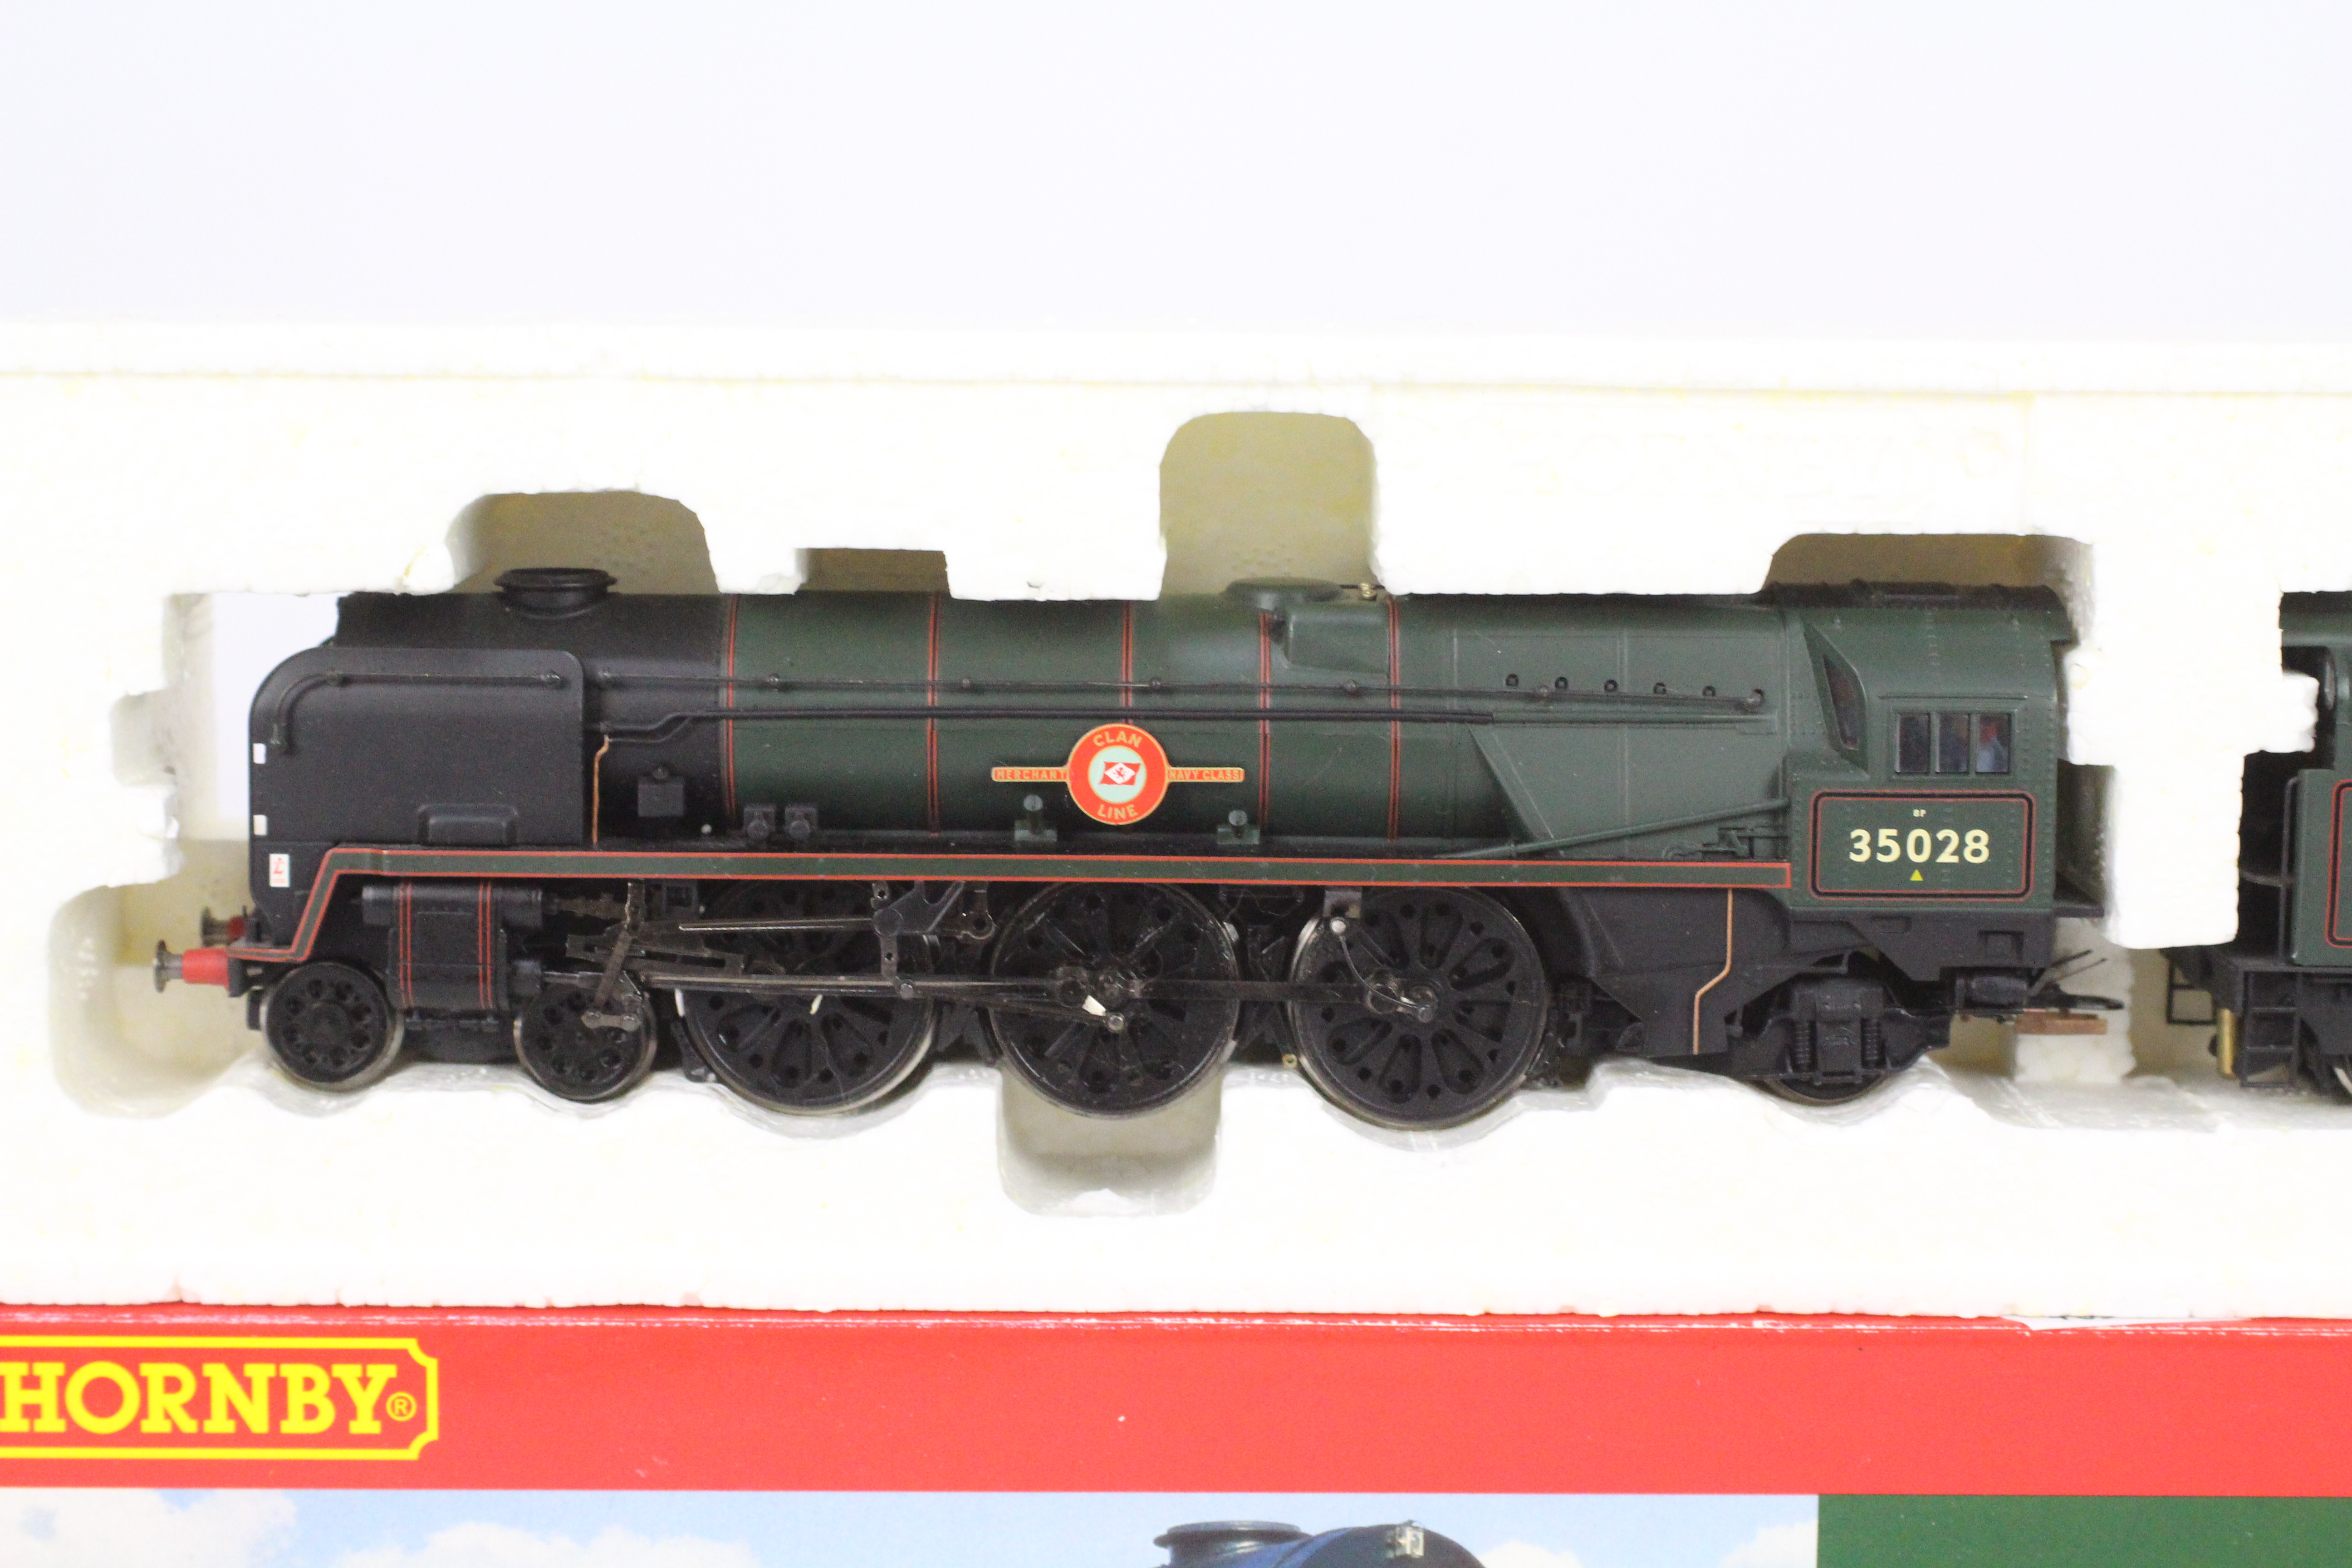 Hornby - A boxed 4-6-2 00 gauge steam locomotive #35028 The model appears to be in good condition, - Image 2 of 3